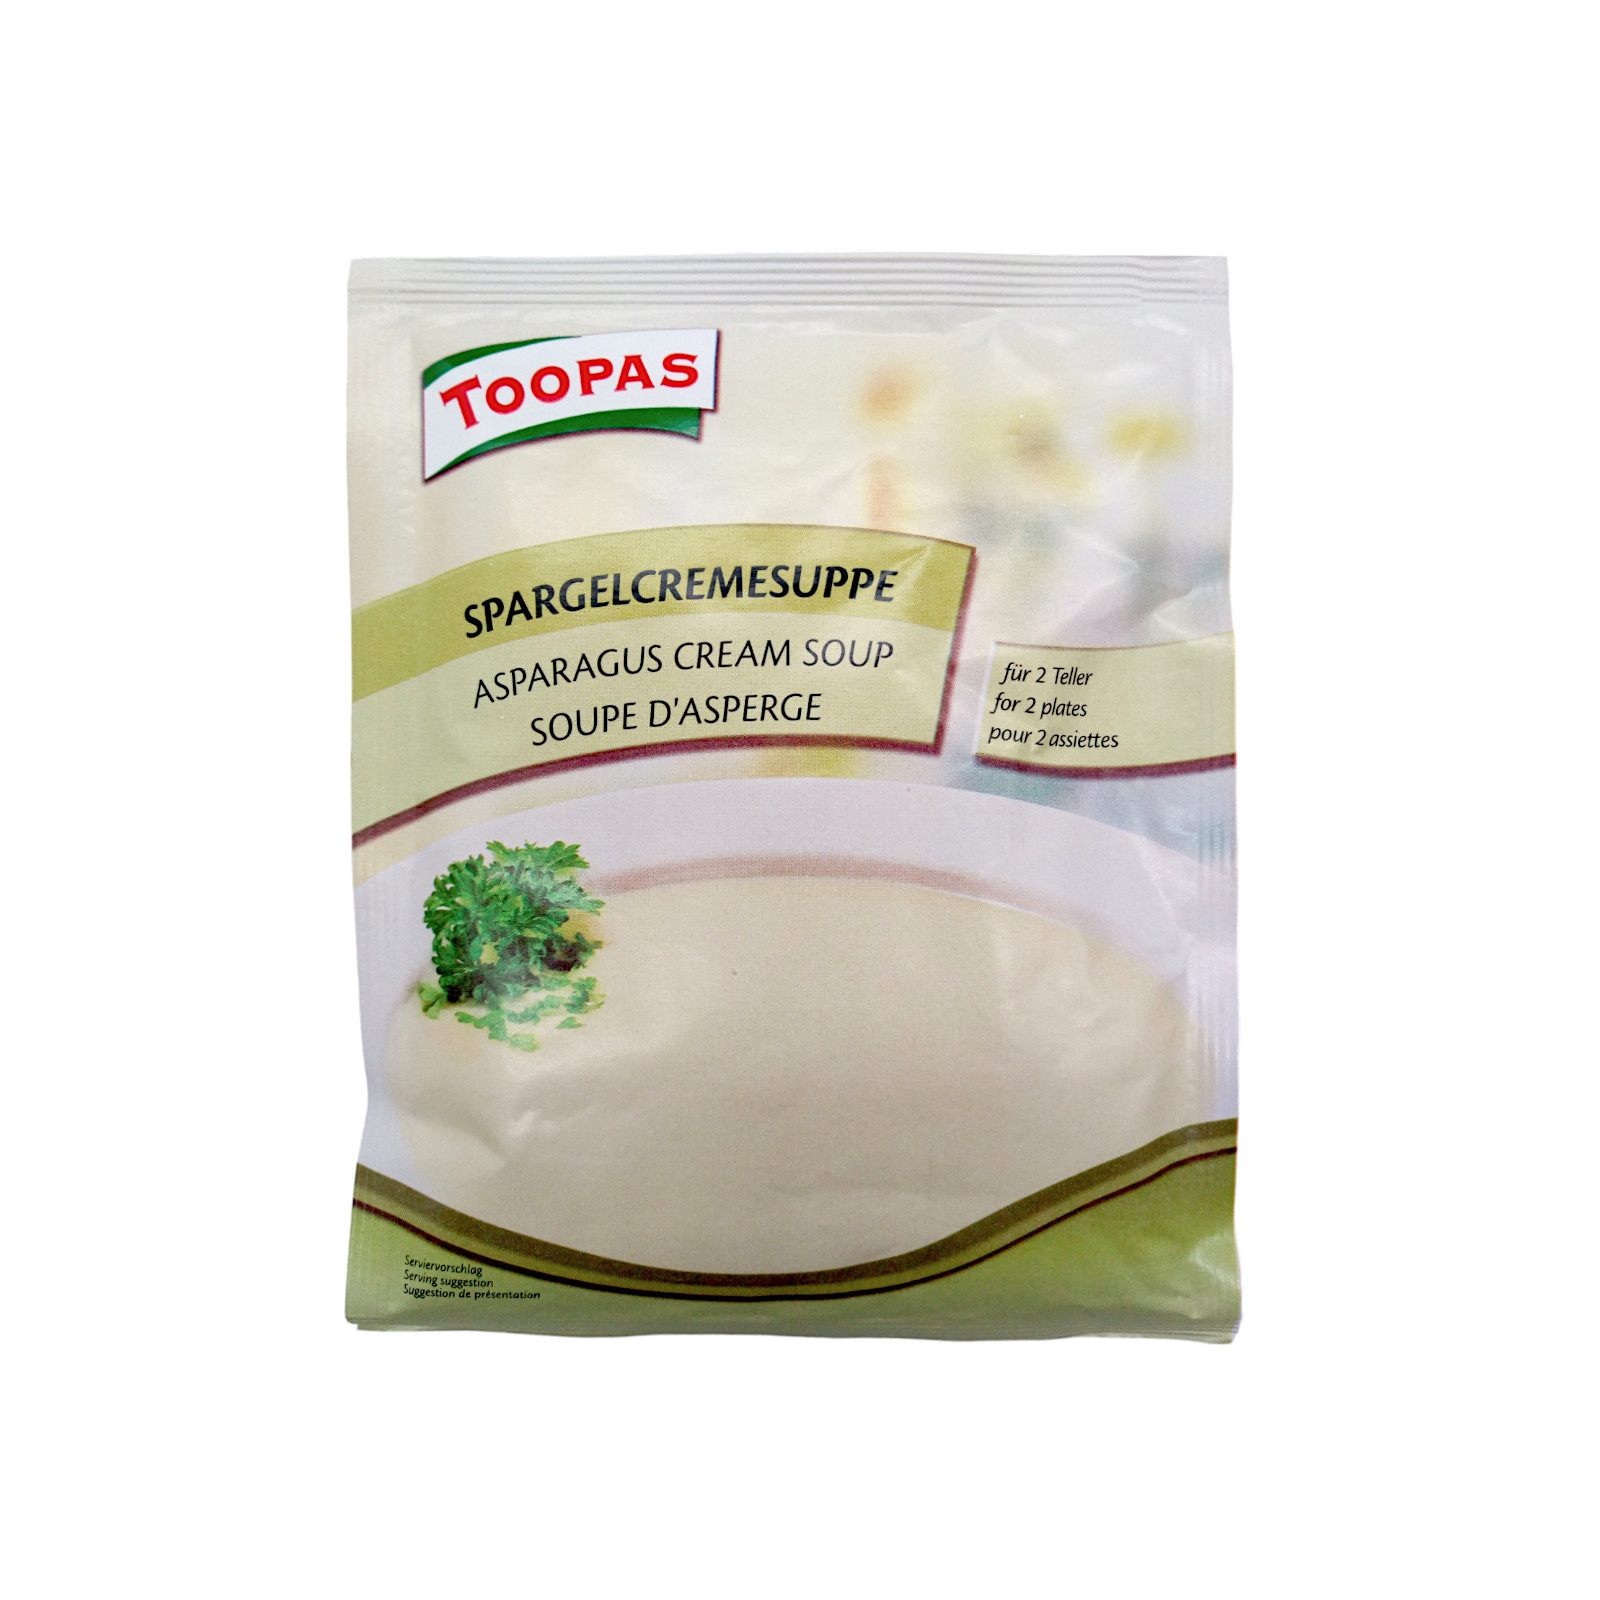 Toopas Spargelcremesuppe 35g